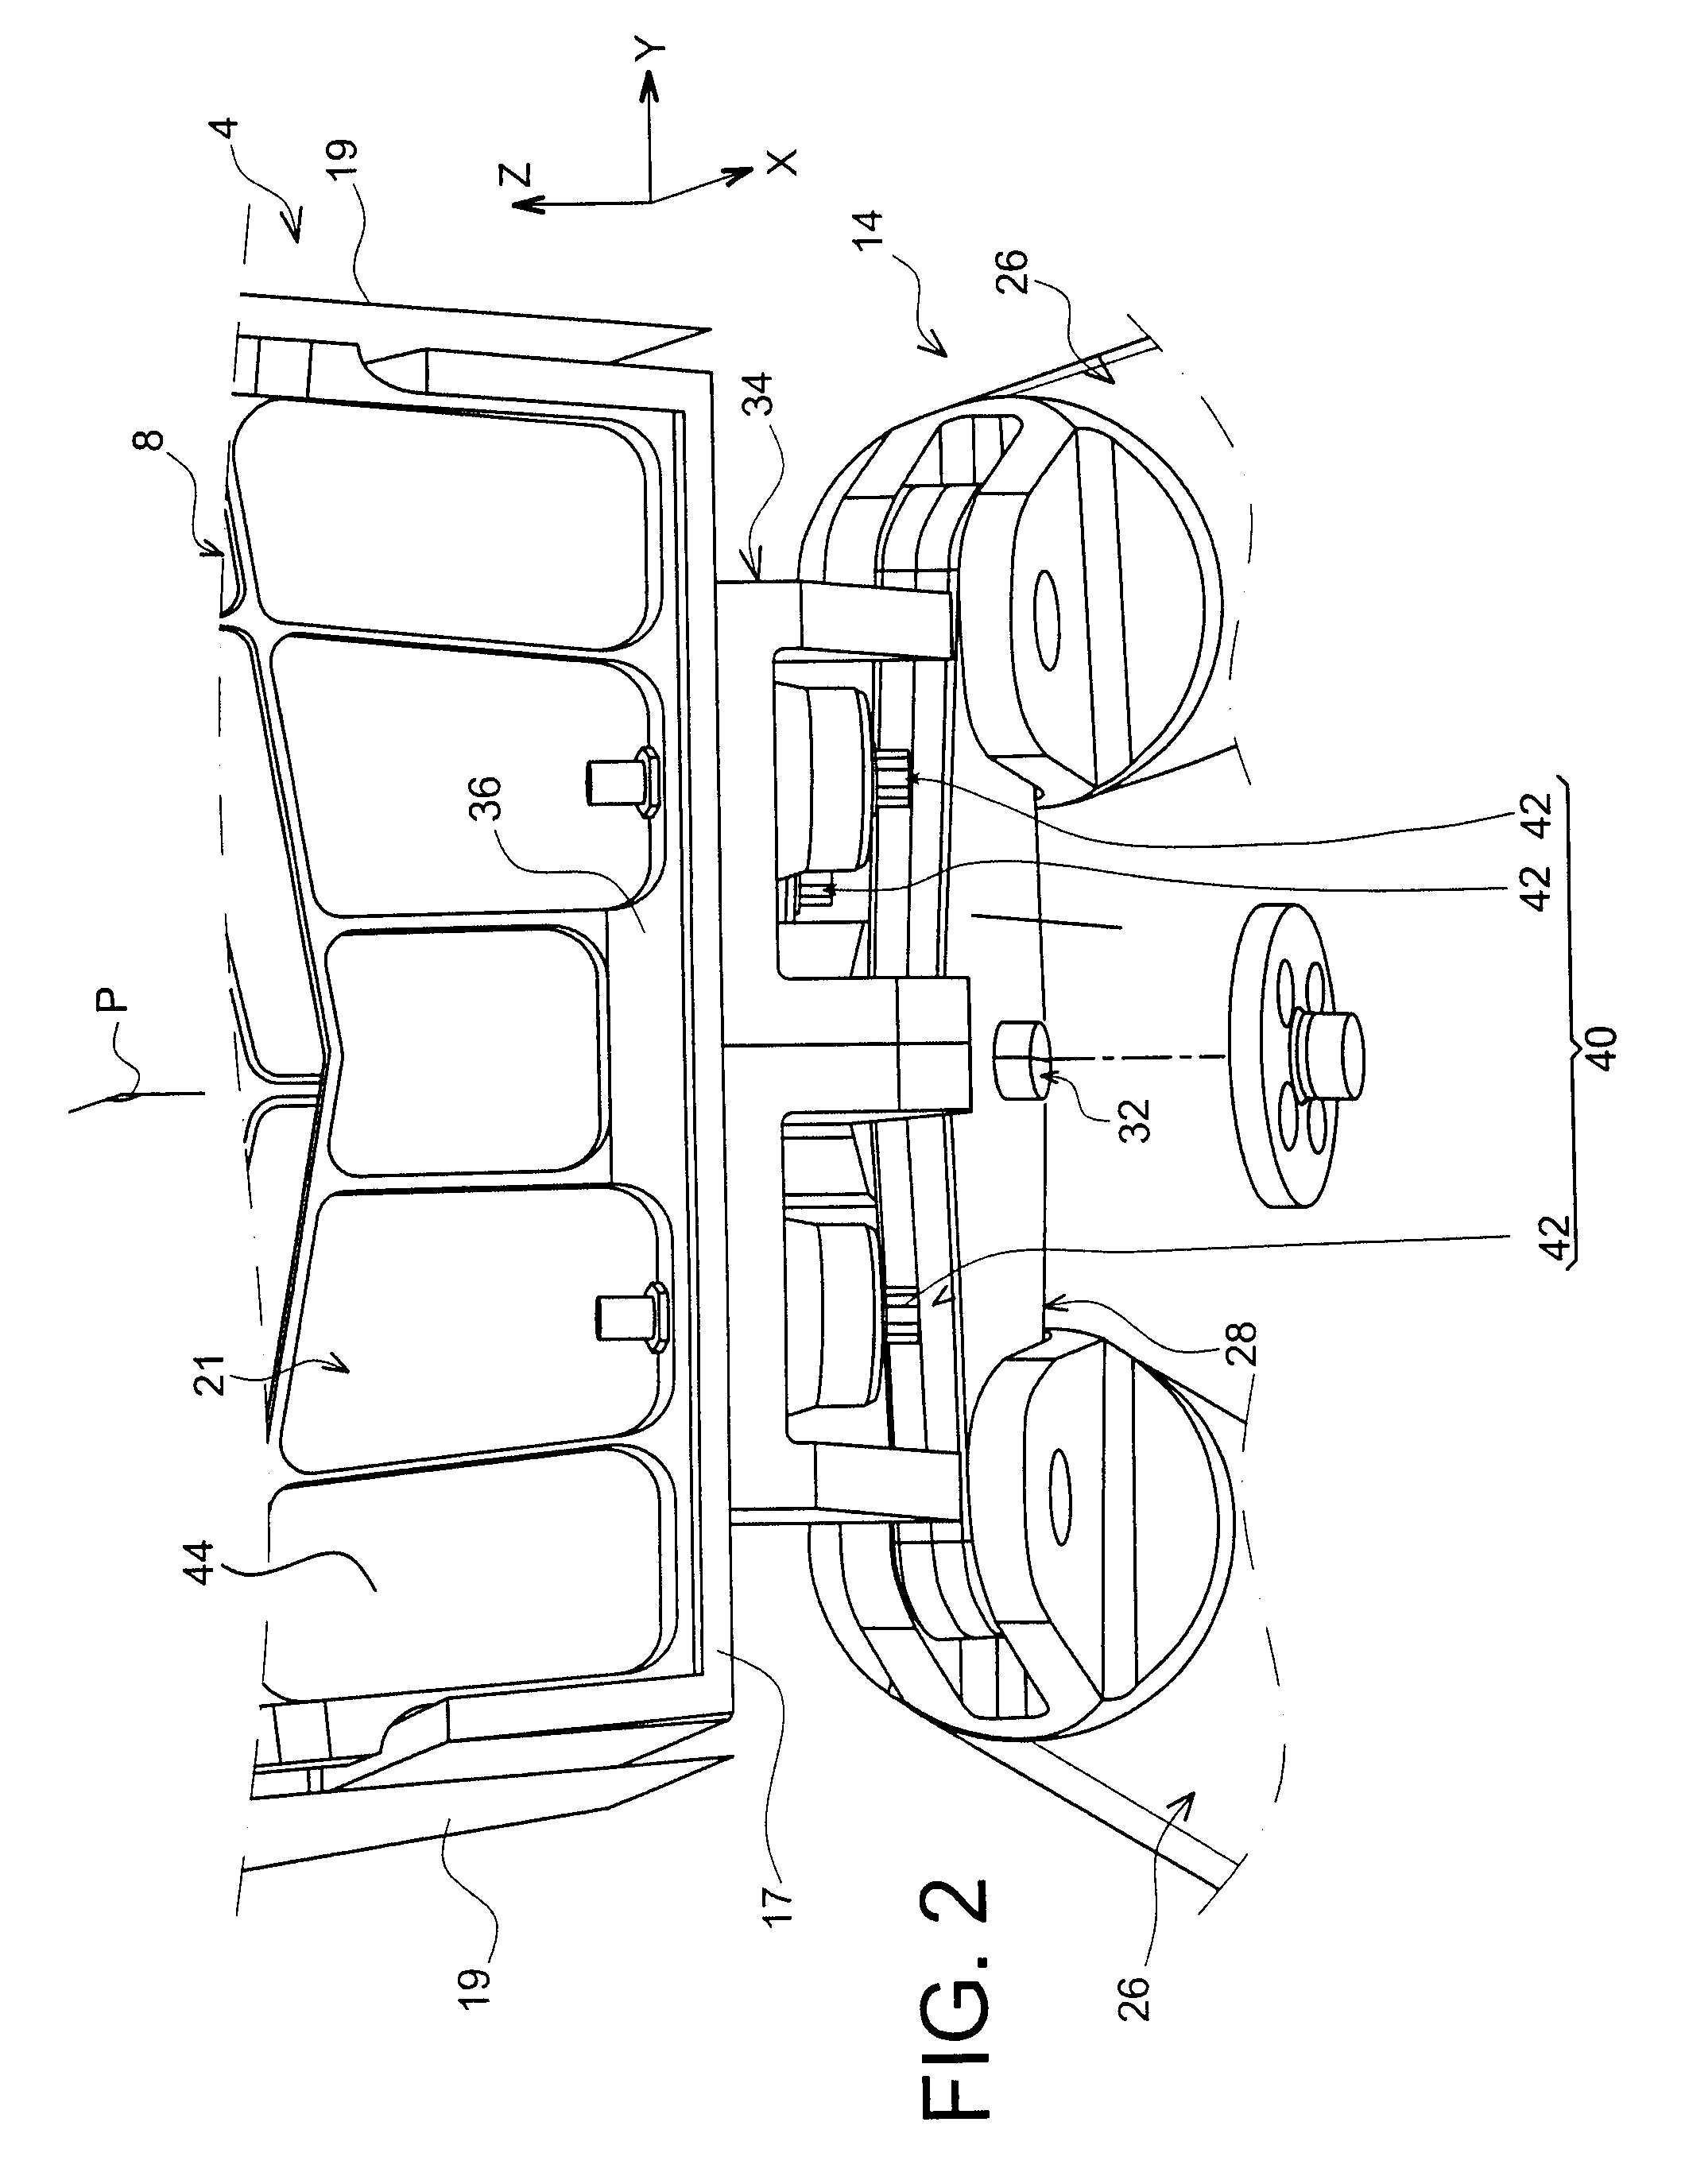 Device for attaching an aircraft engine